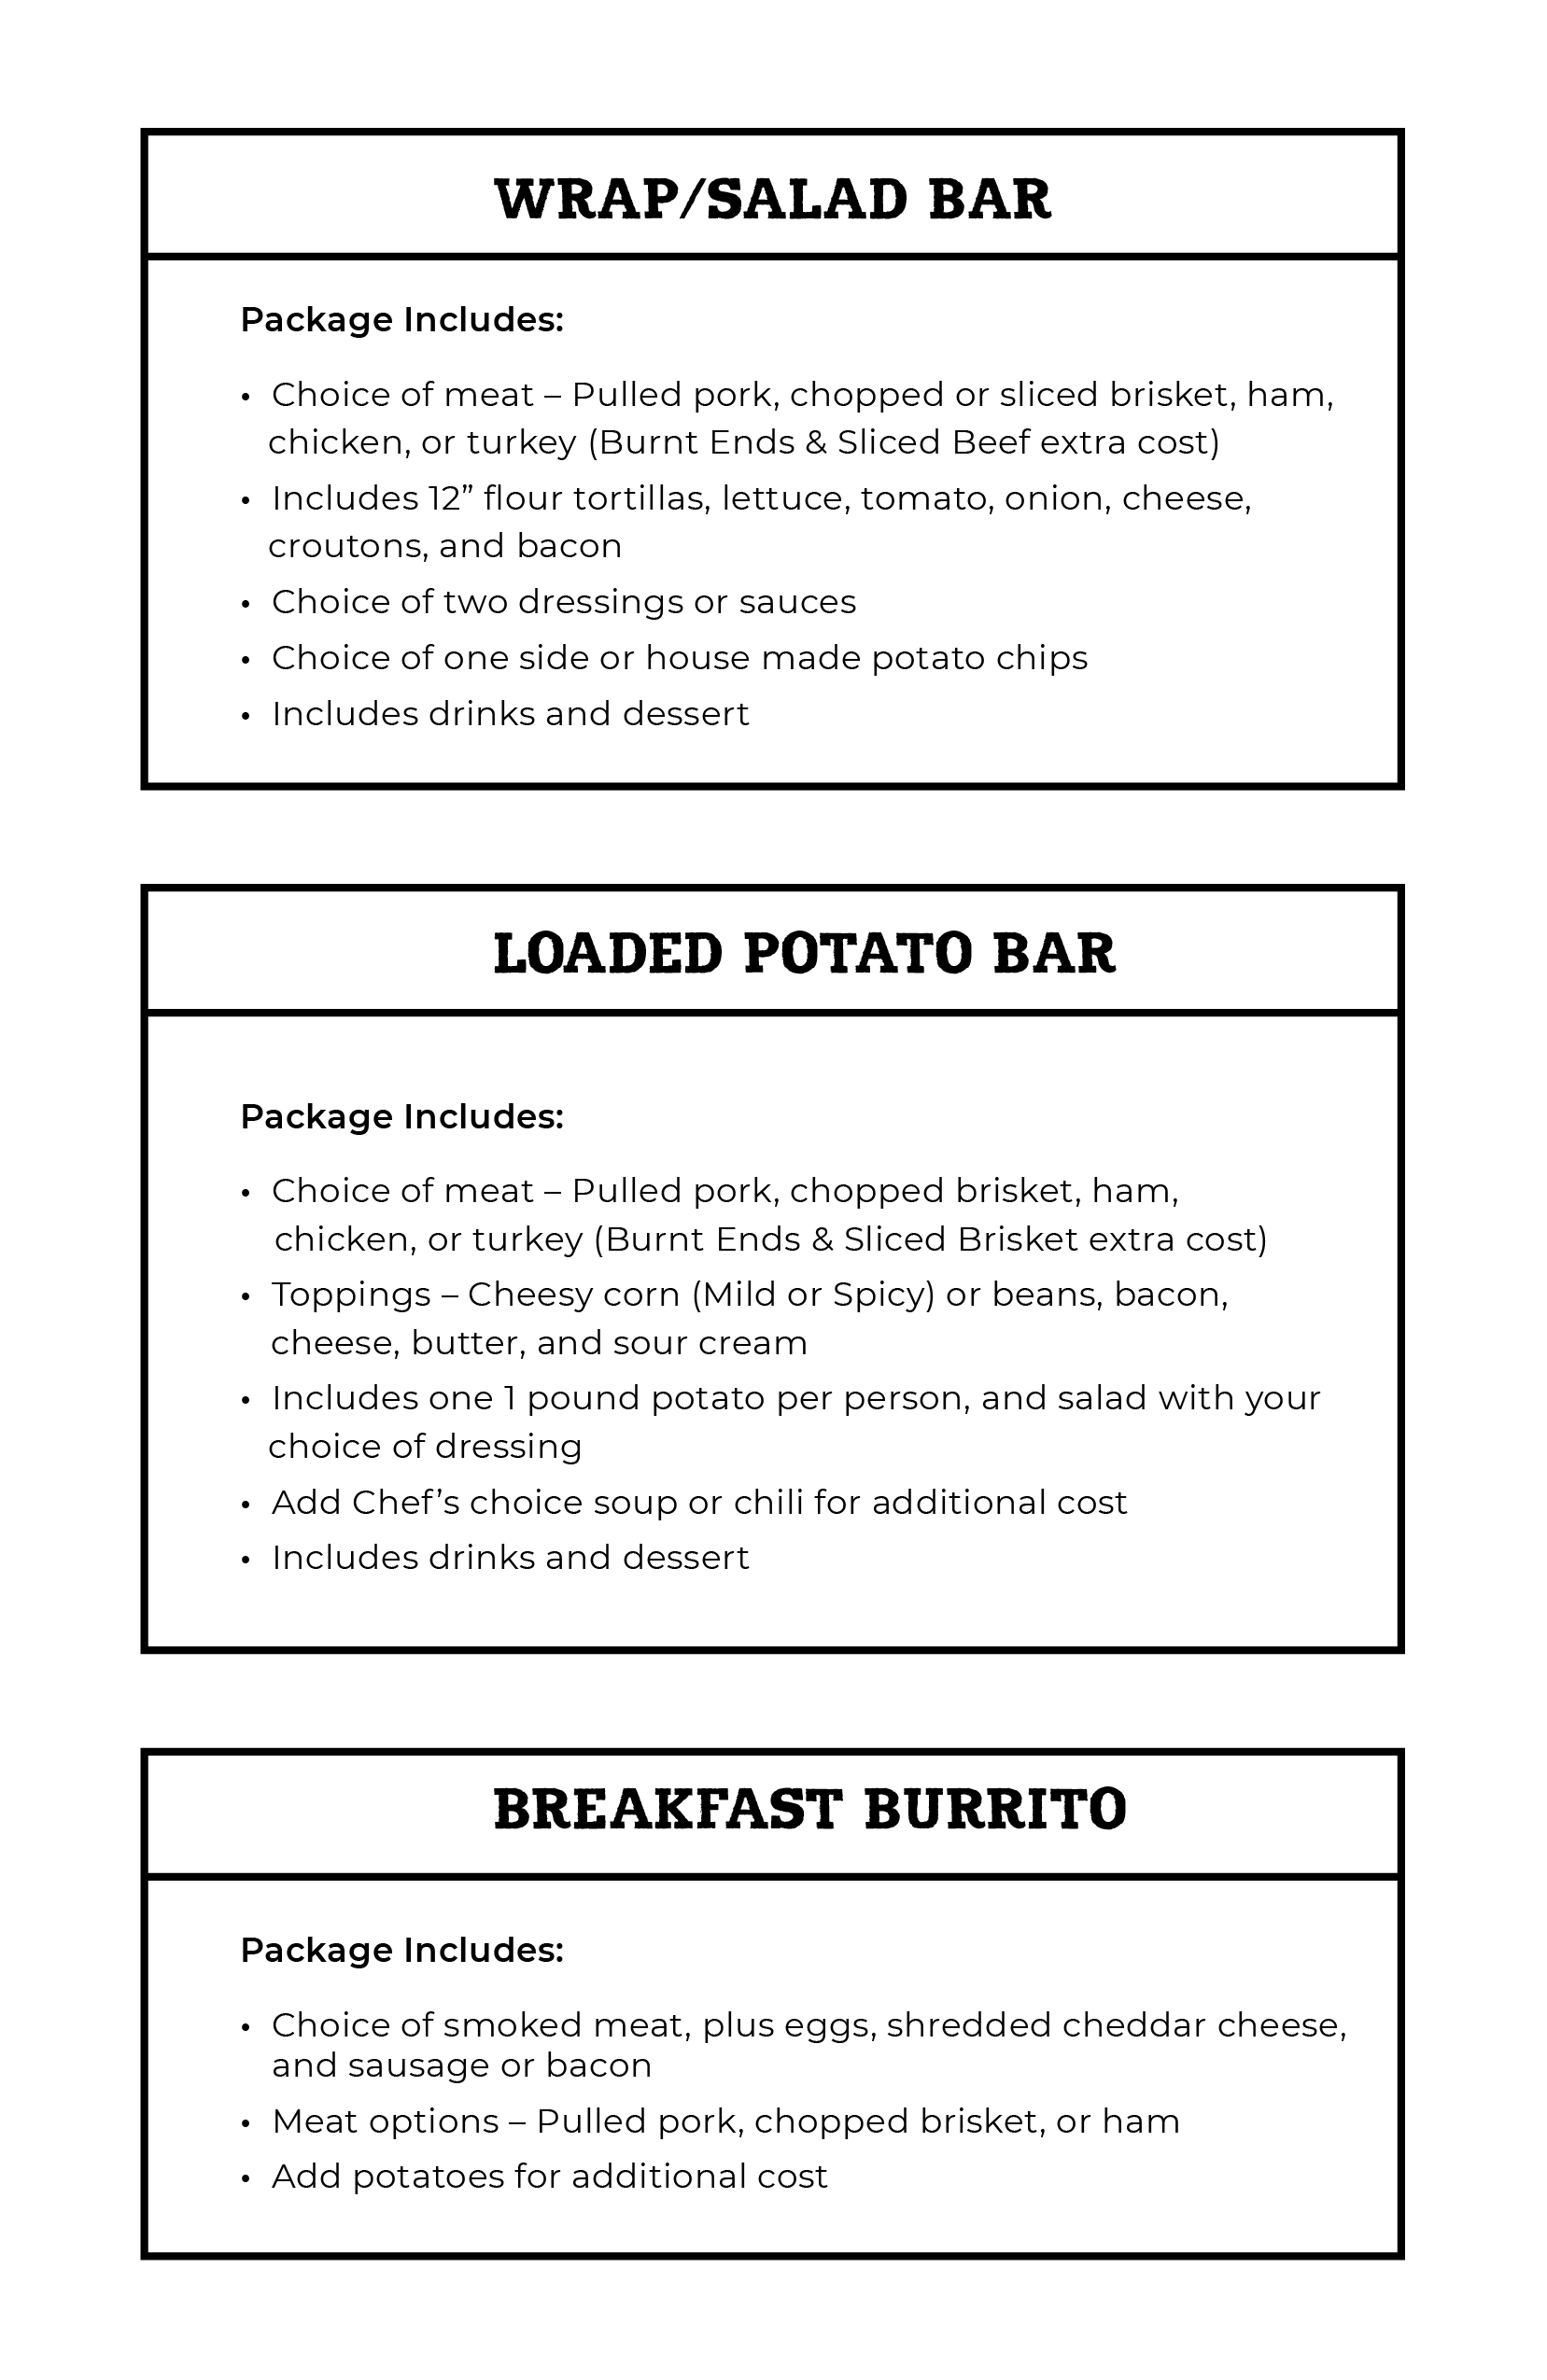 ShortE's BBQ Family-Style Catering Menu